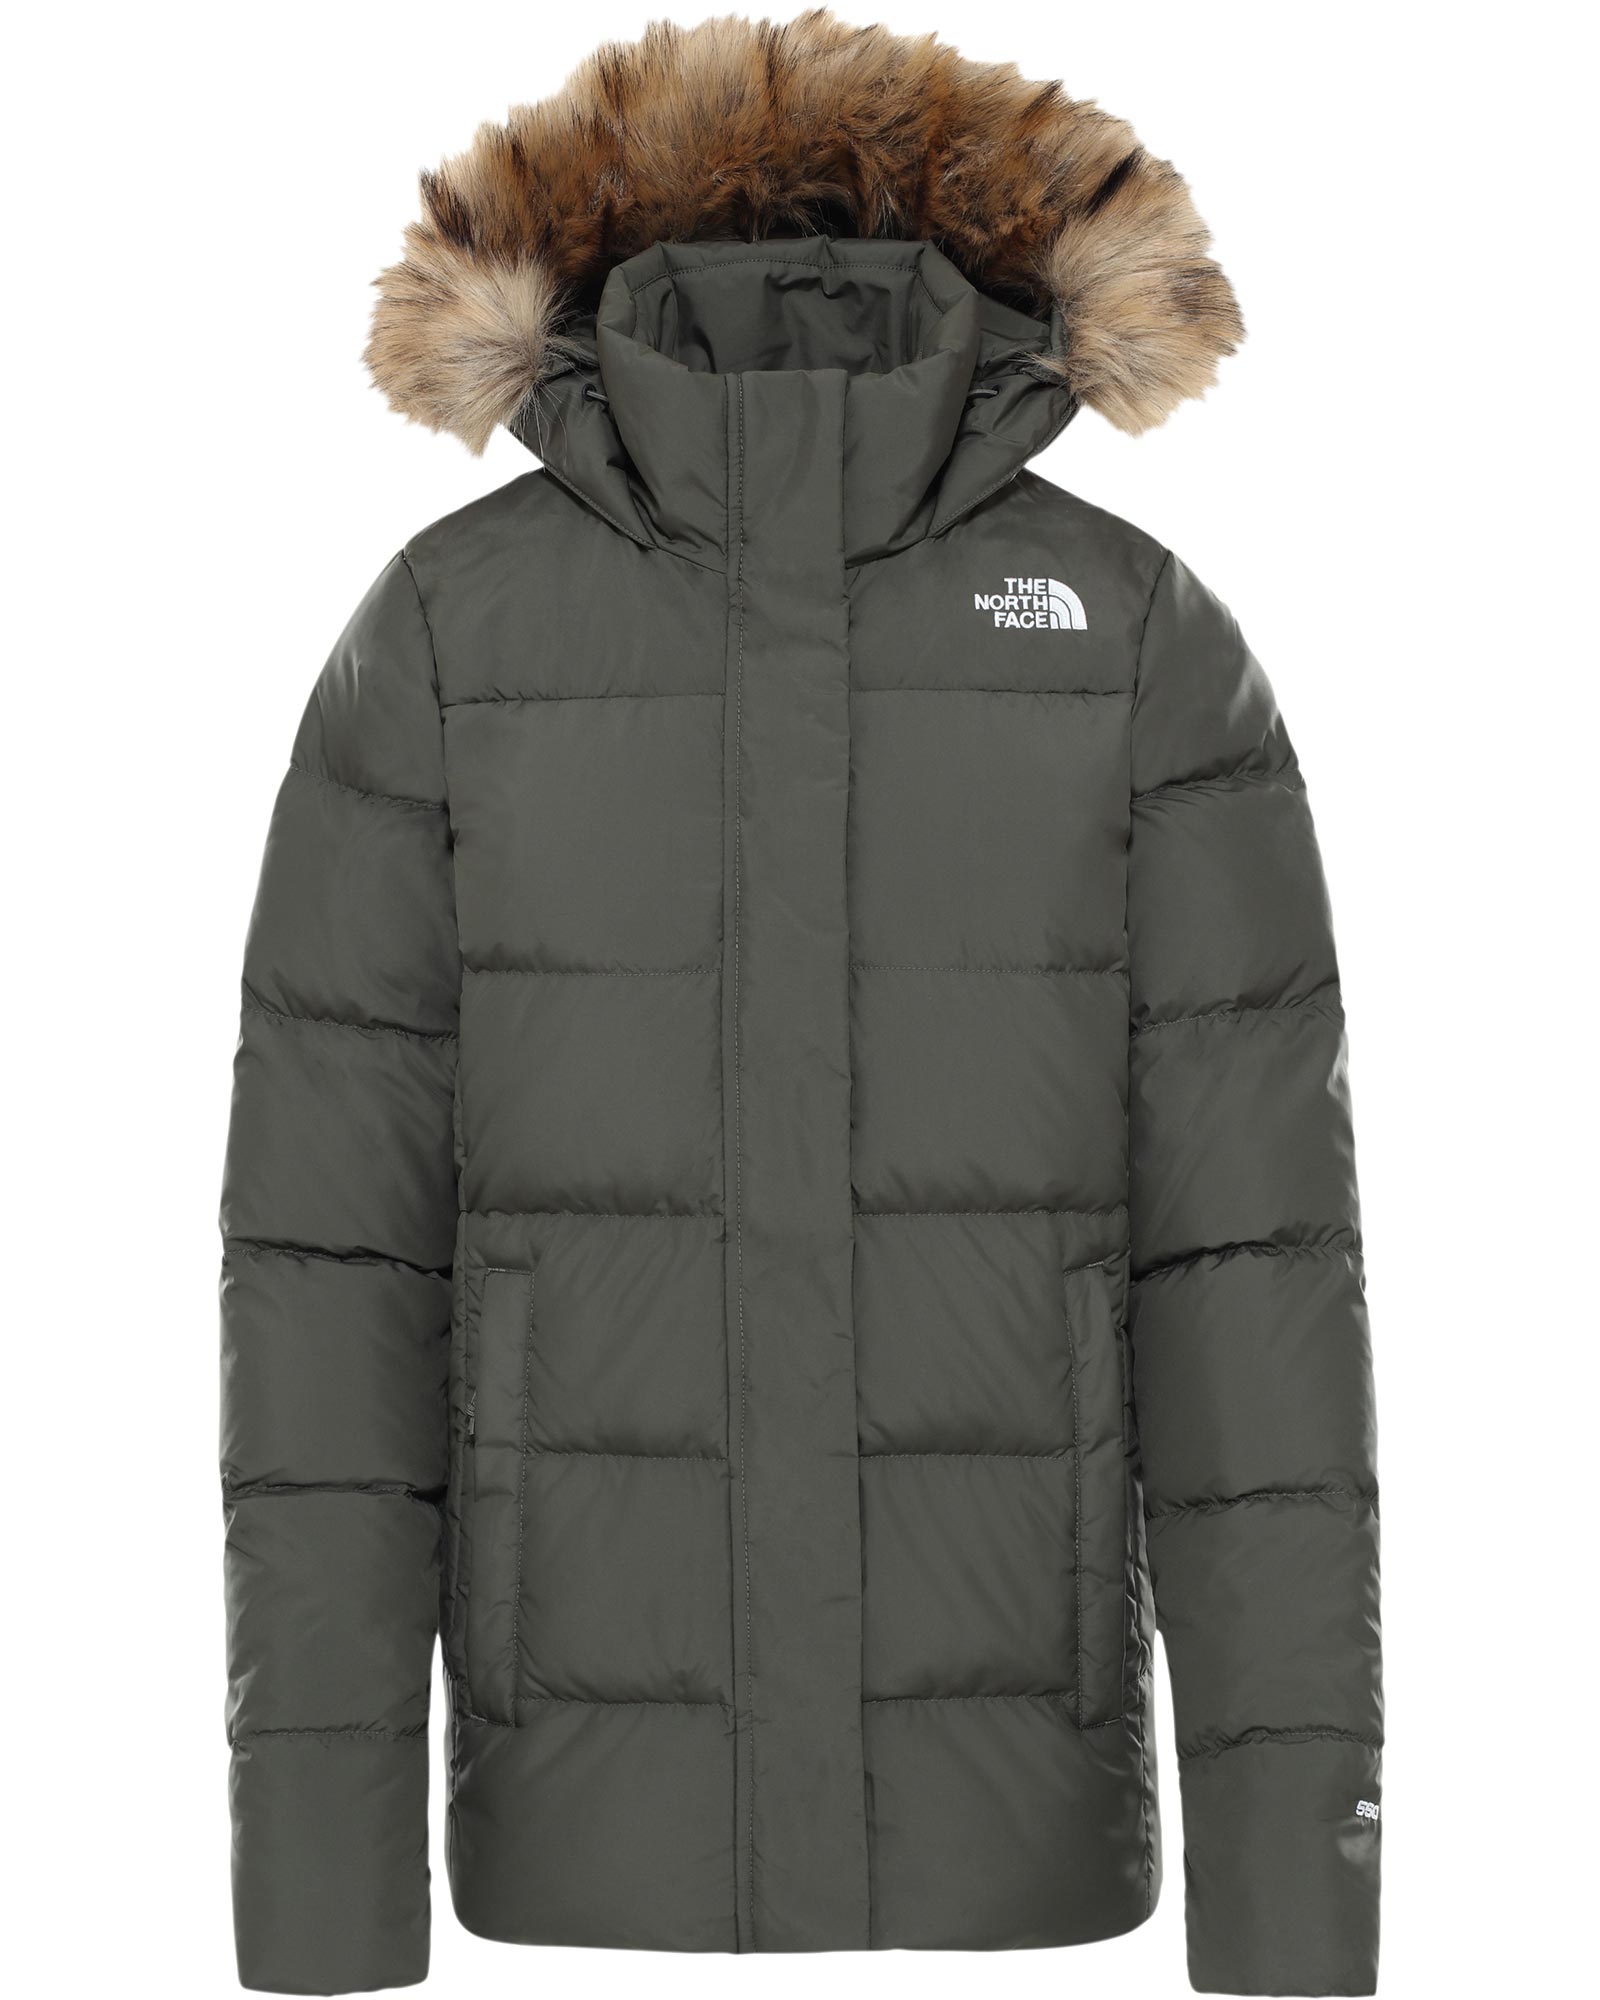 The North Face Gotham Women’s Jacket - New Taupe Green S